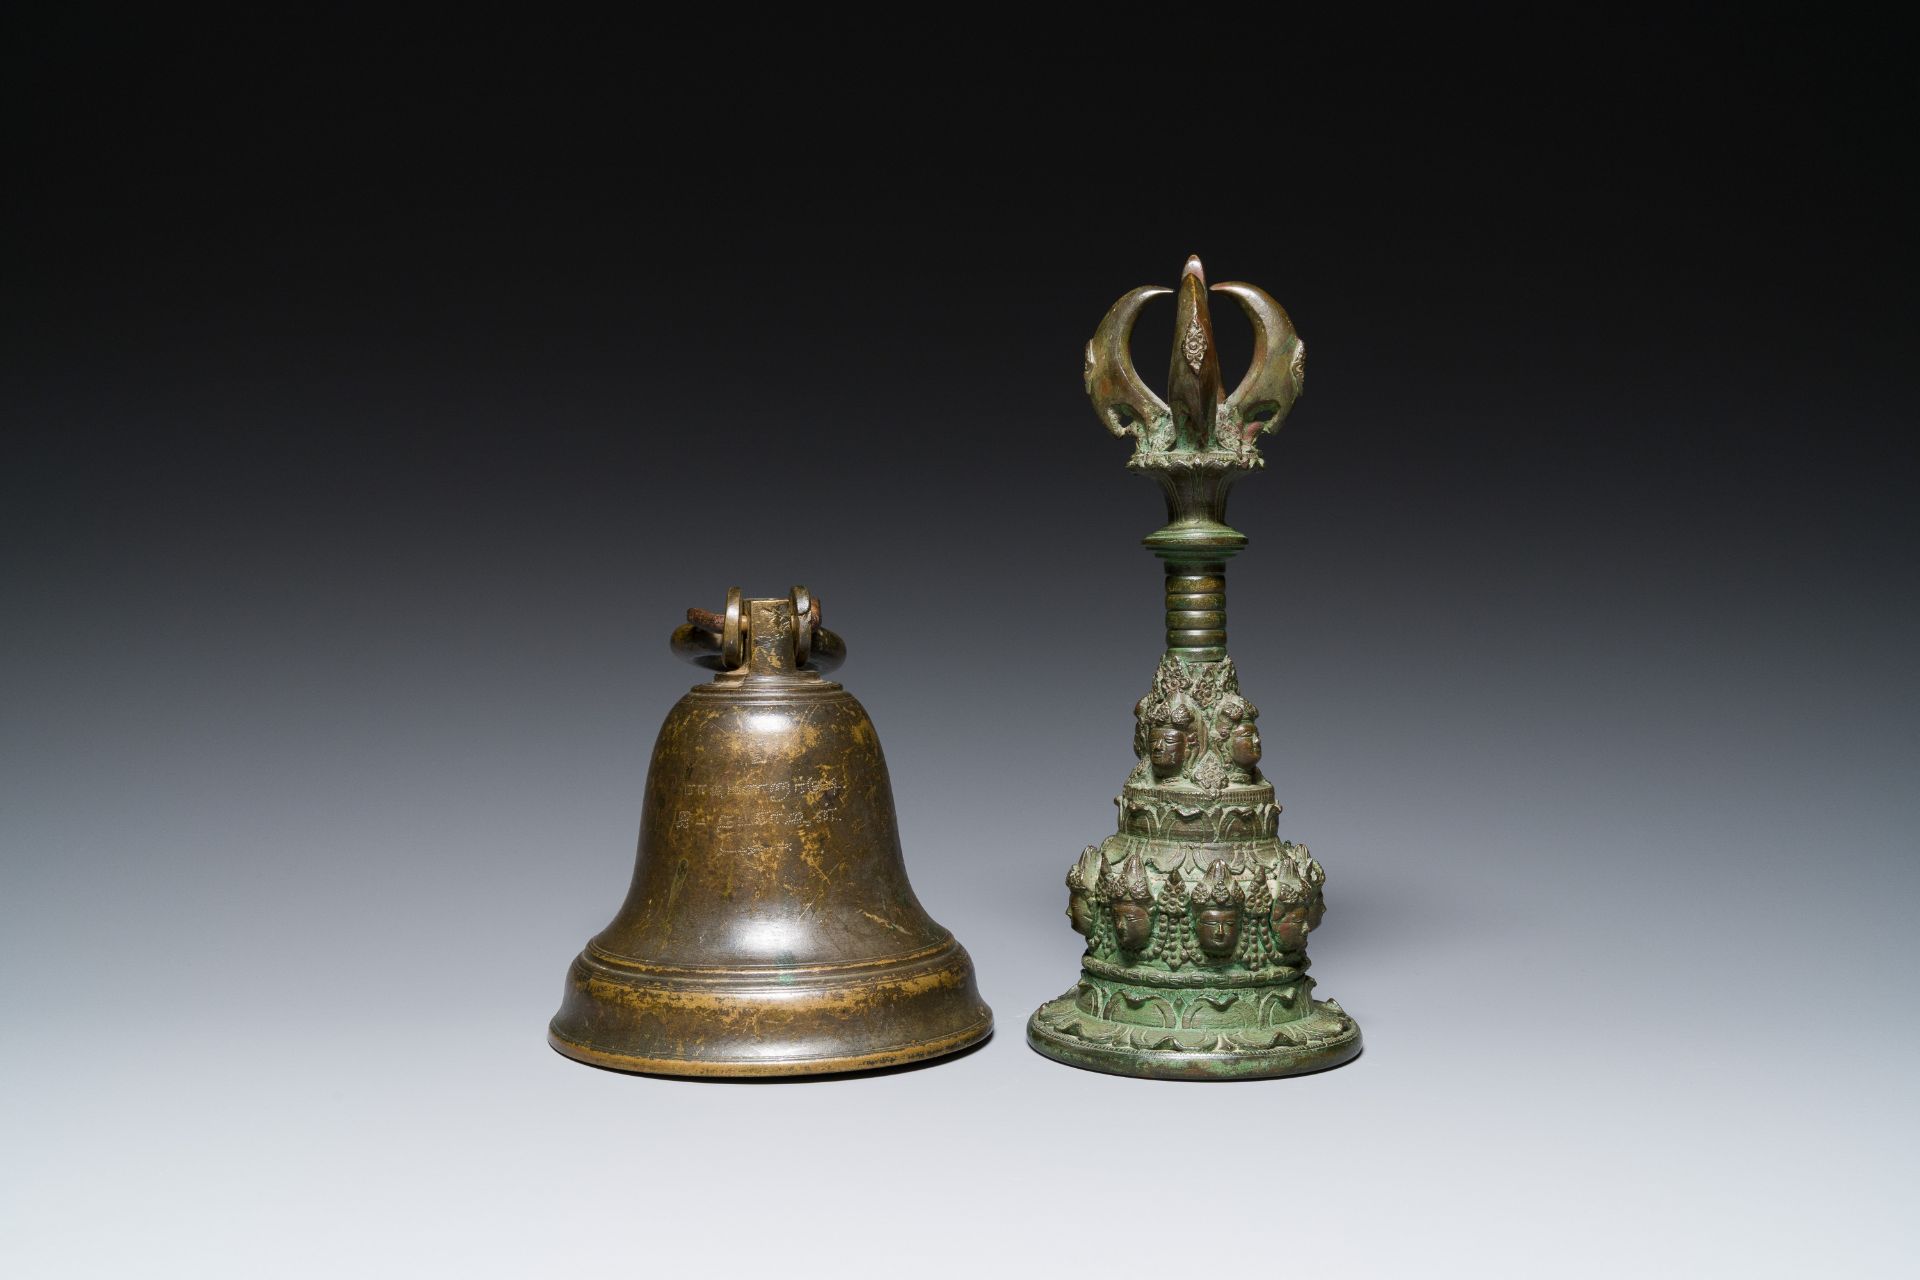 A bronze bell and a ceremonial hand bell, South Asia and Southeast Asia, 19th C. or earlier - Bild 4 aus 21